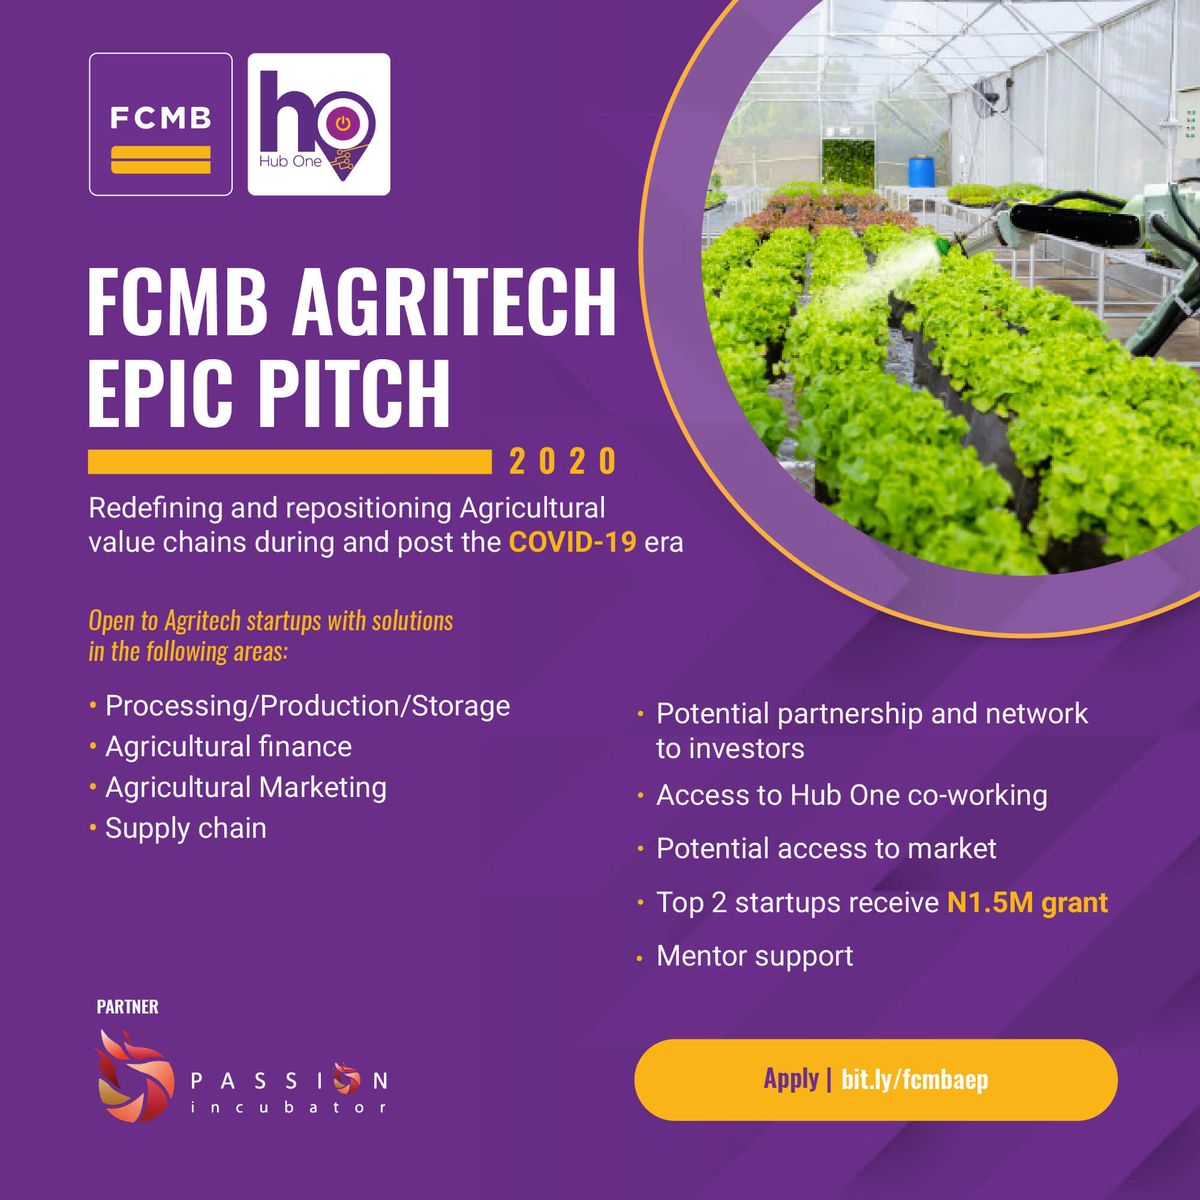 FCMB and Passion Incubator launch Agritech EPIC Pitch